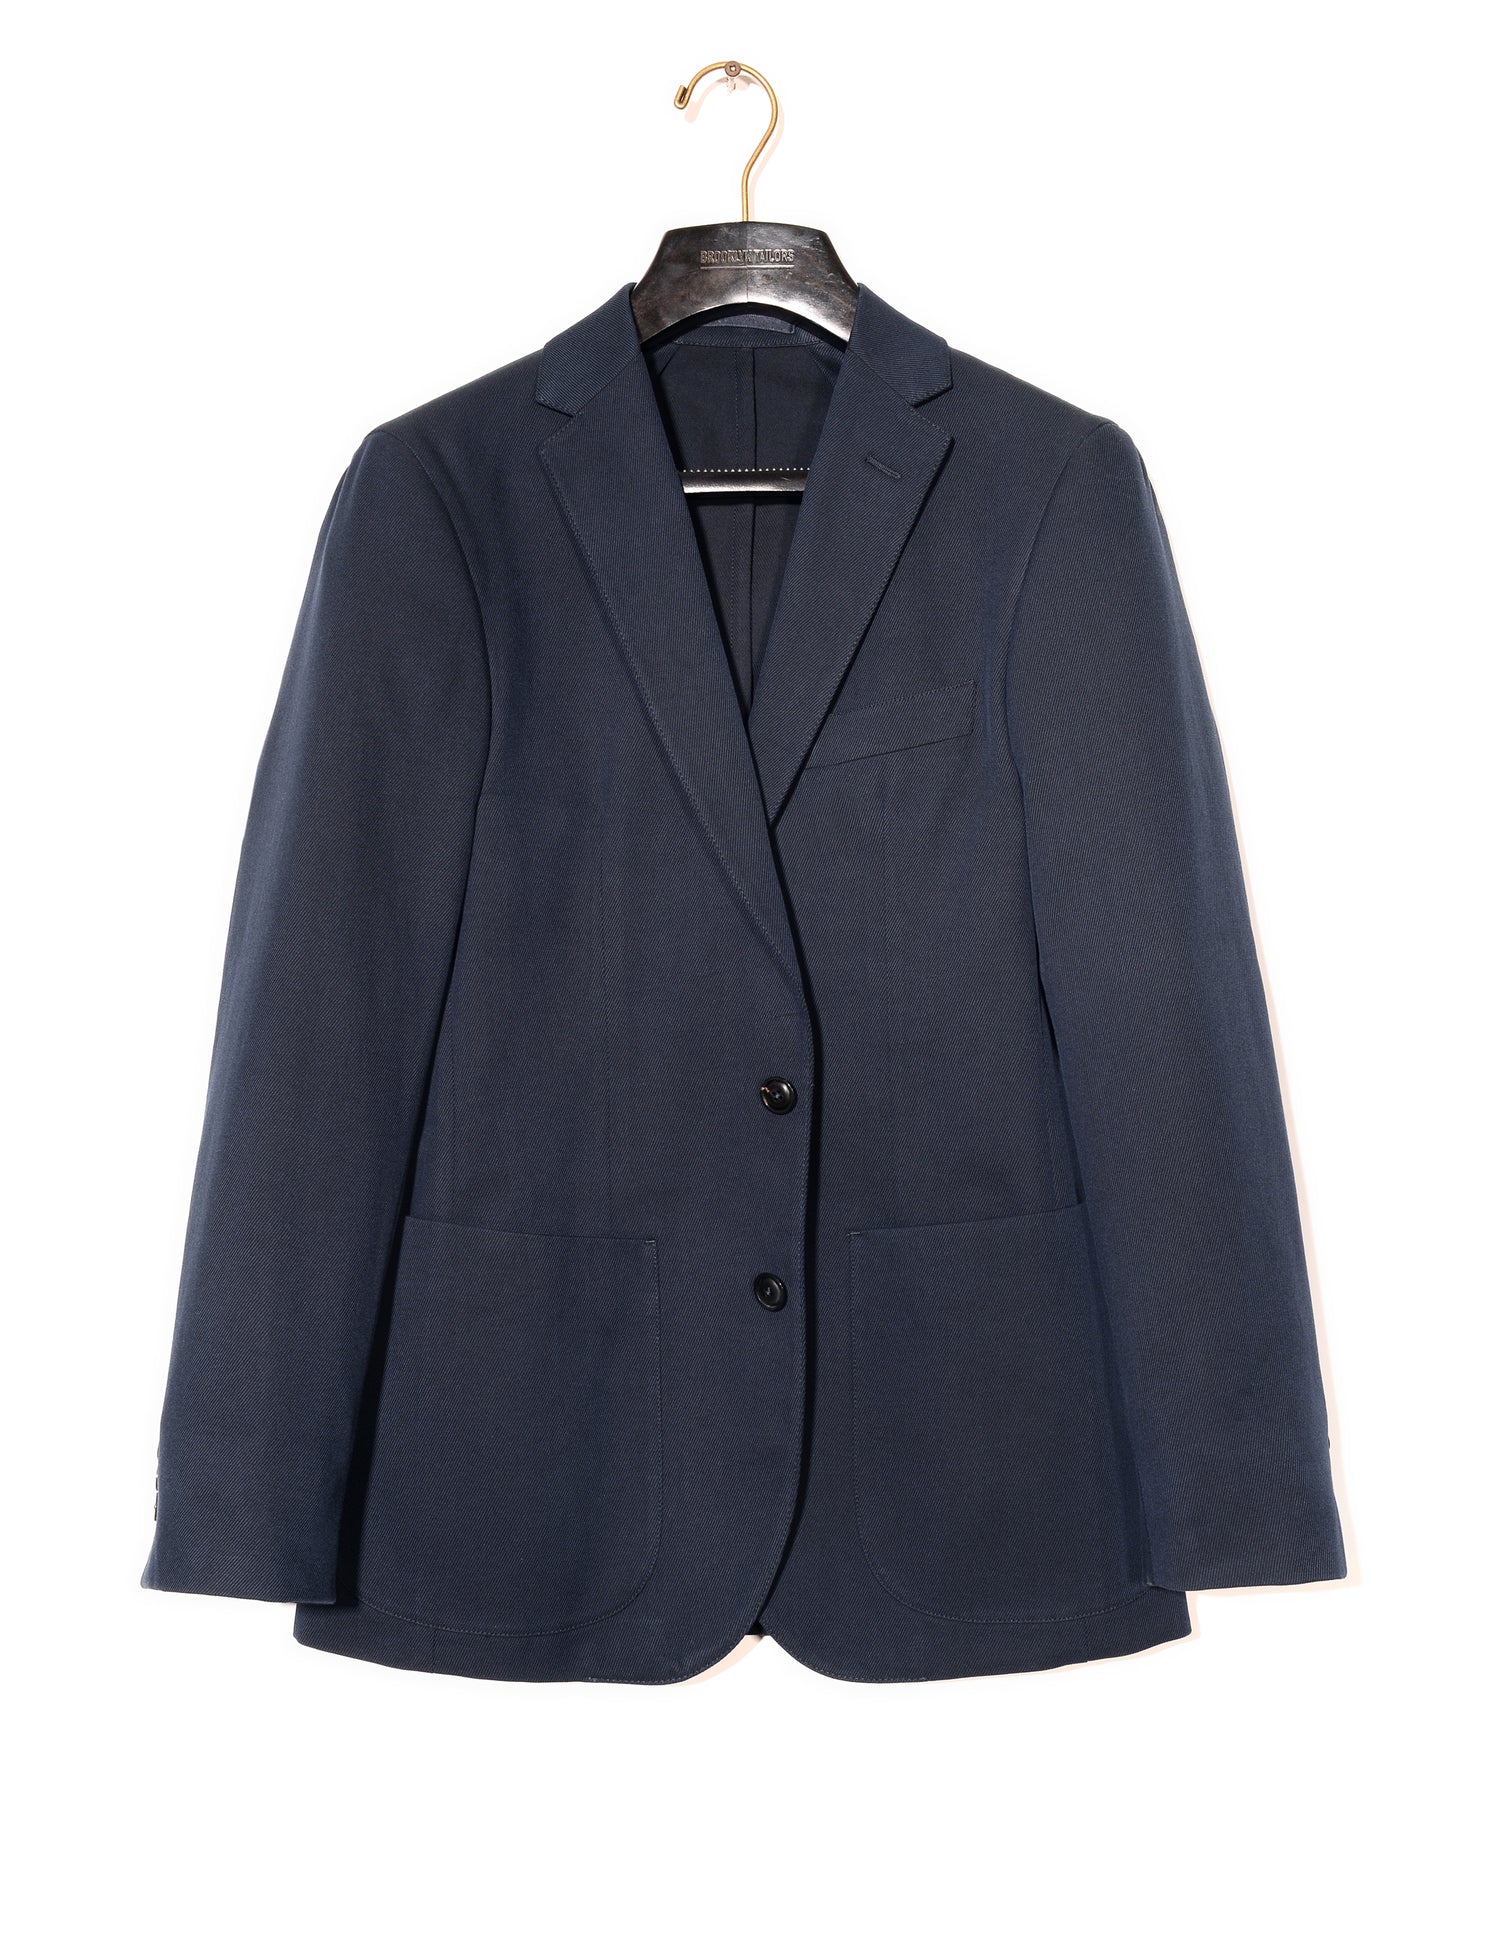 Brooklyn Tailors BKT35 Unstructured Jacket in Cavalry Twill - Navy full length shot on hanger